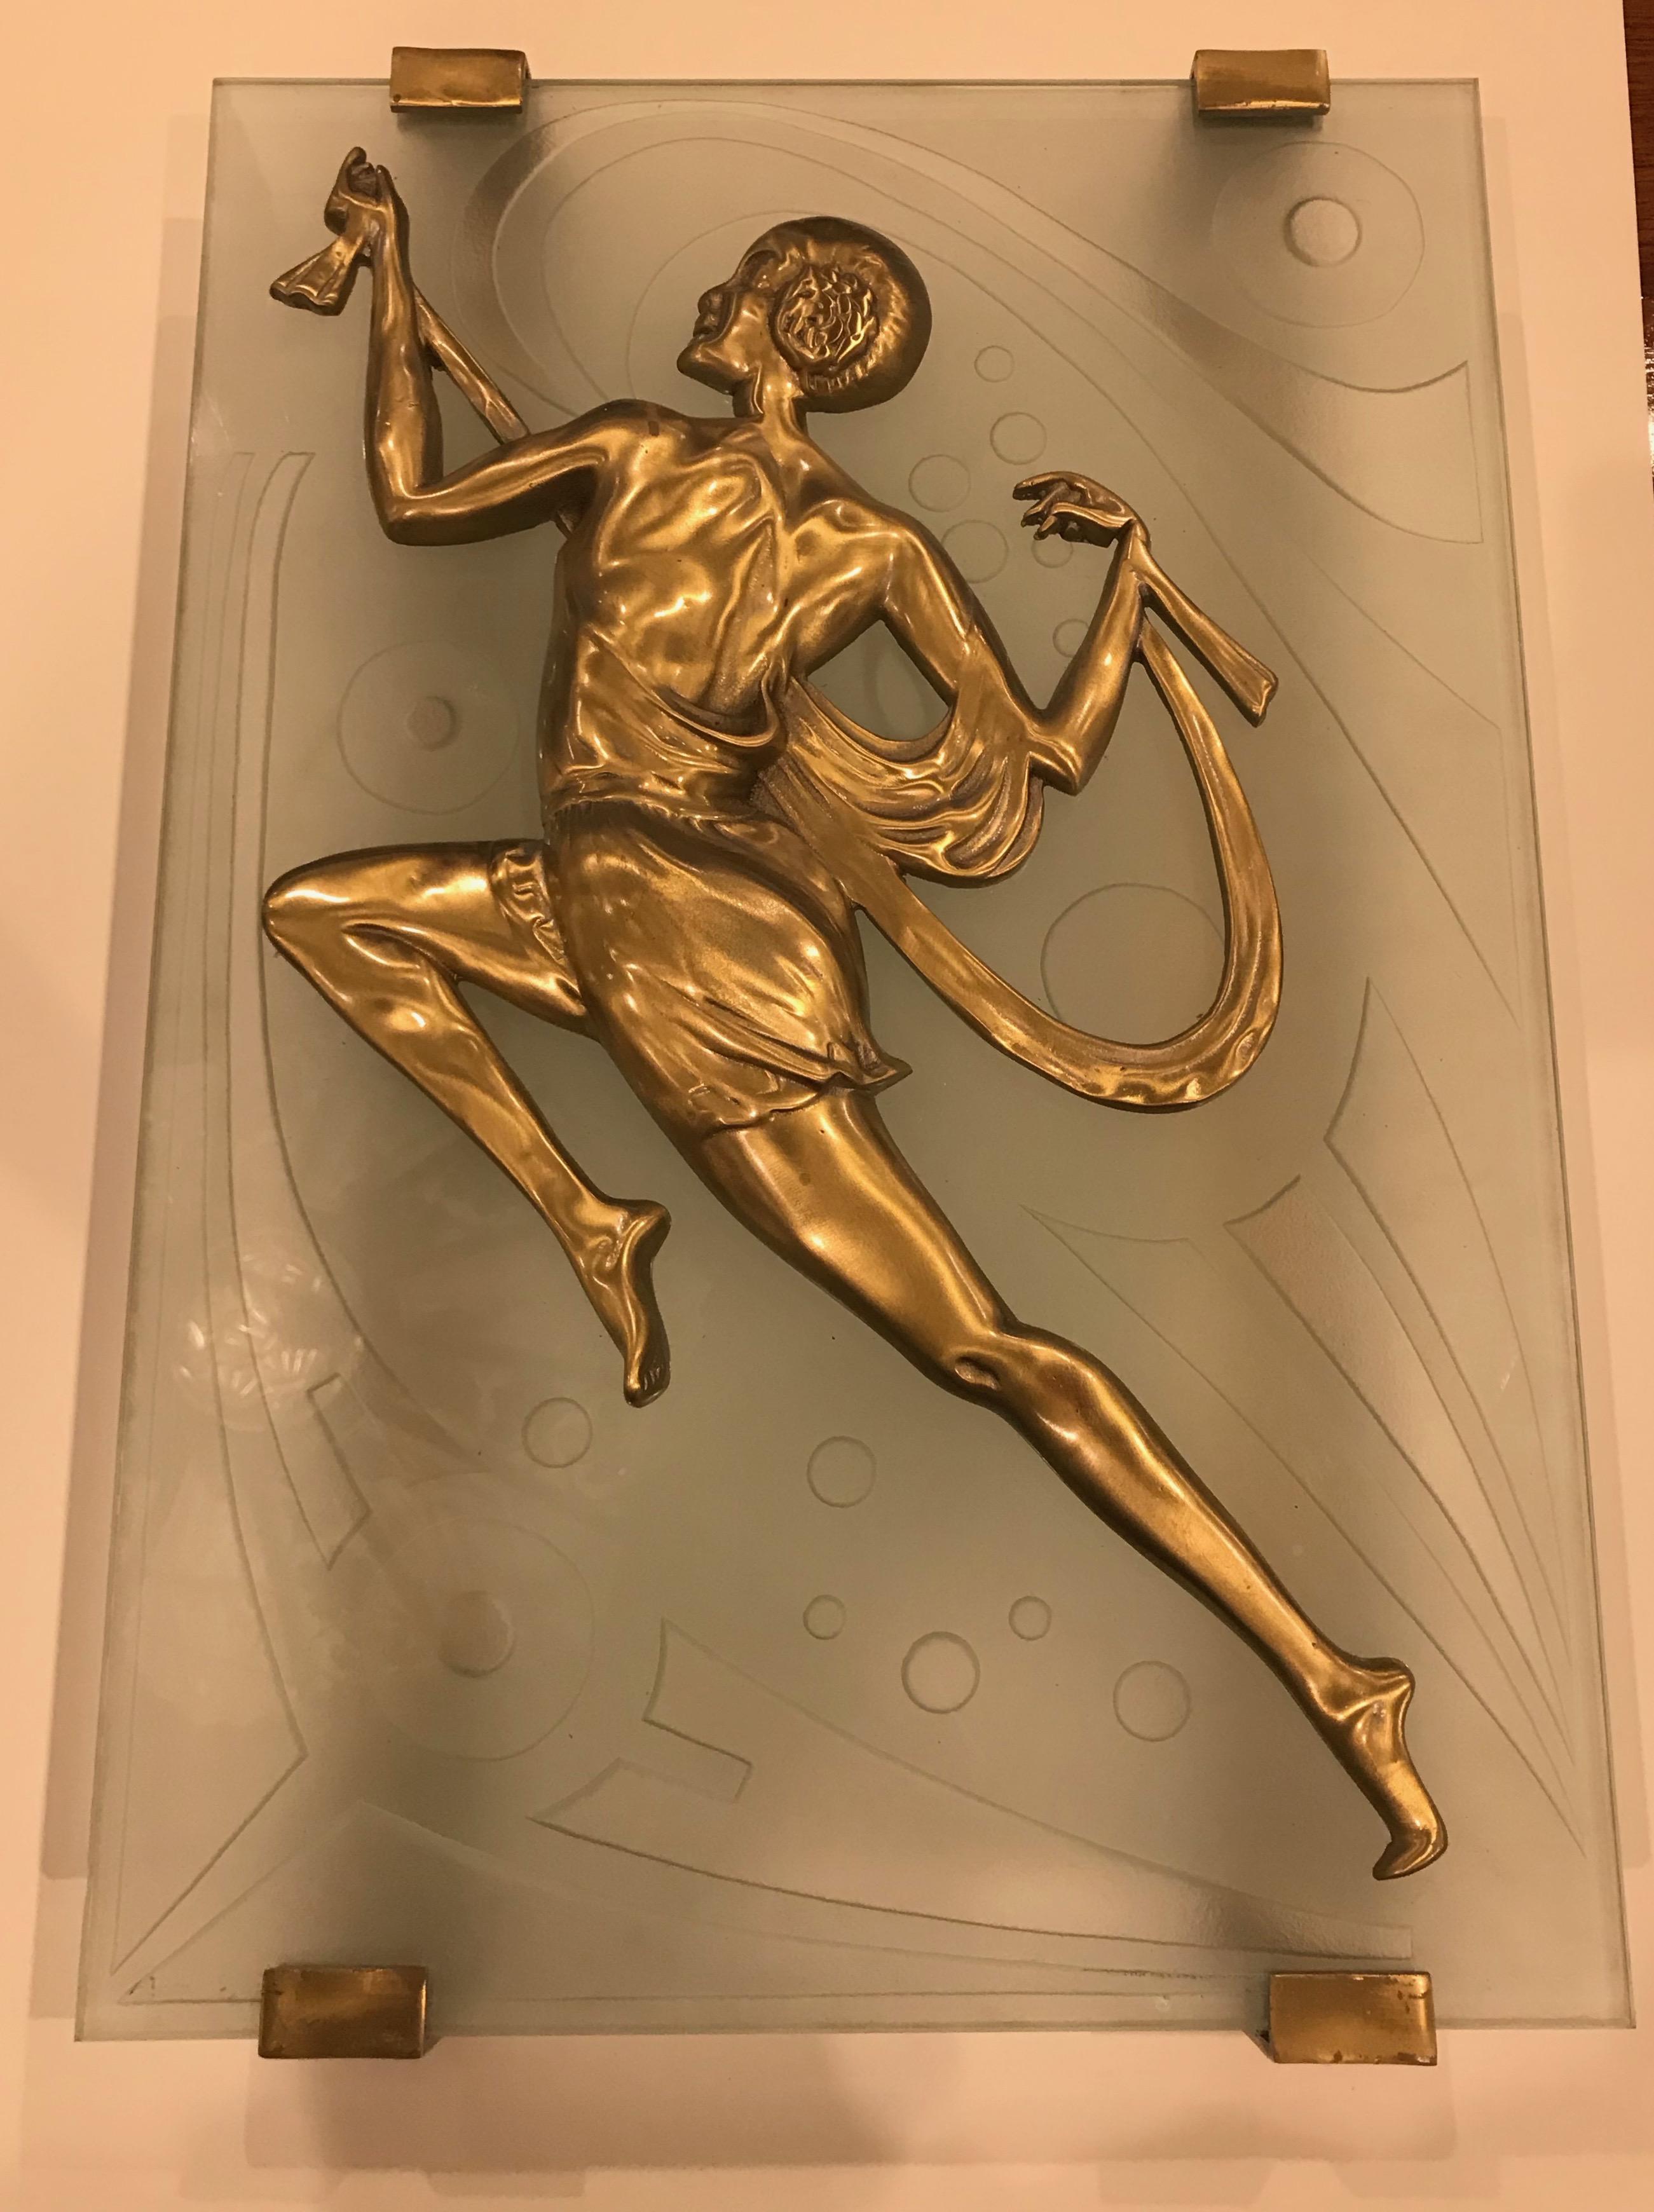 Pair of French Art Deco style wall sconces. Beautiful brass female dancers on carved deco glass. Beautiful deco details throughout. Has been rewired for American Use. Each sconce takes two candelabra bulb (60 Watt max each bulb).